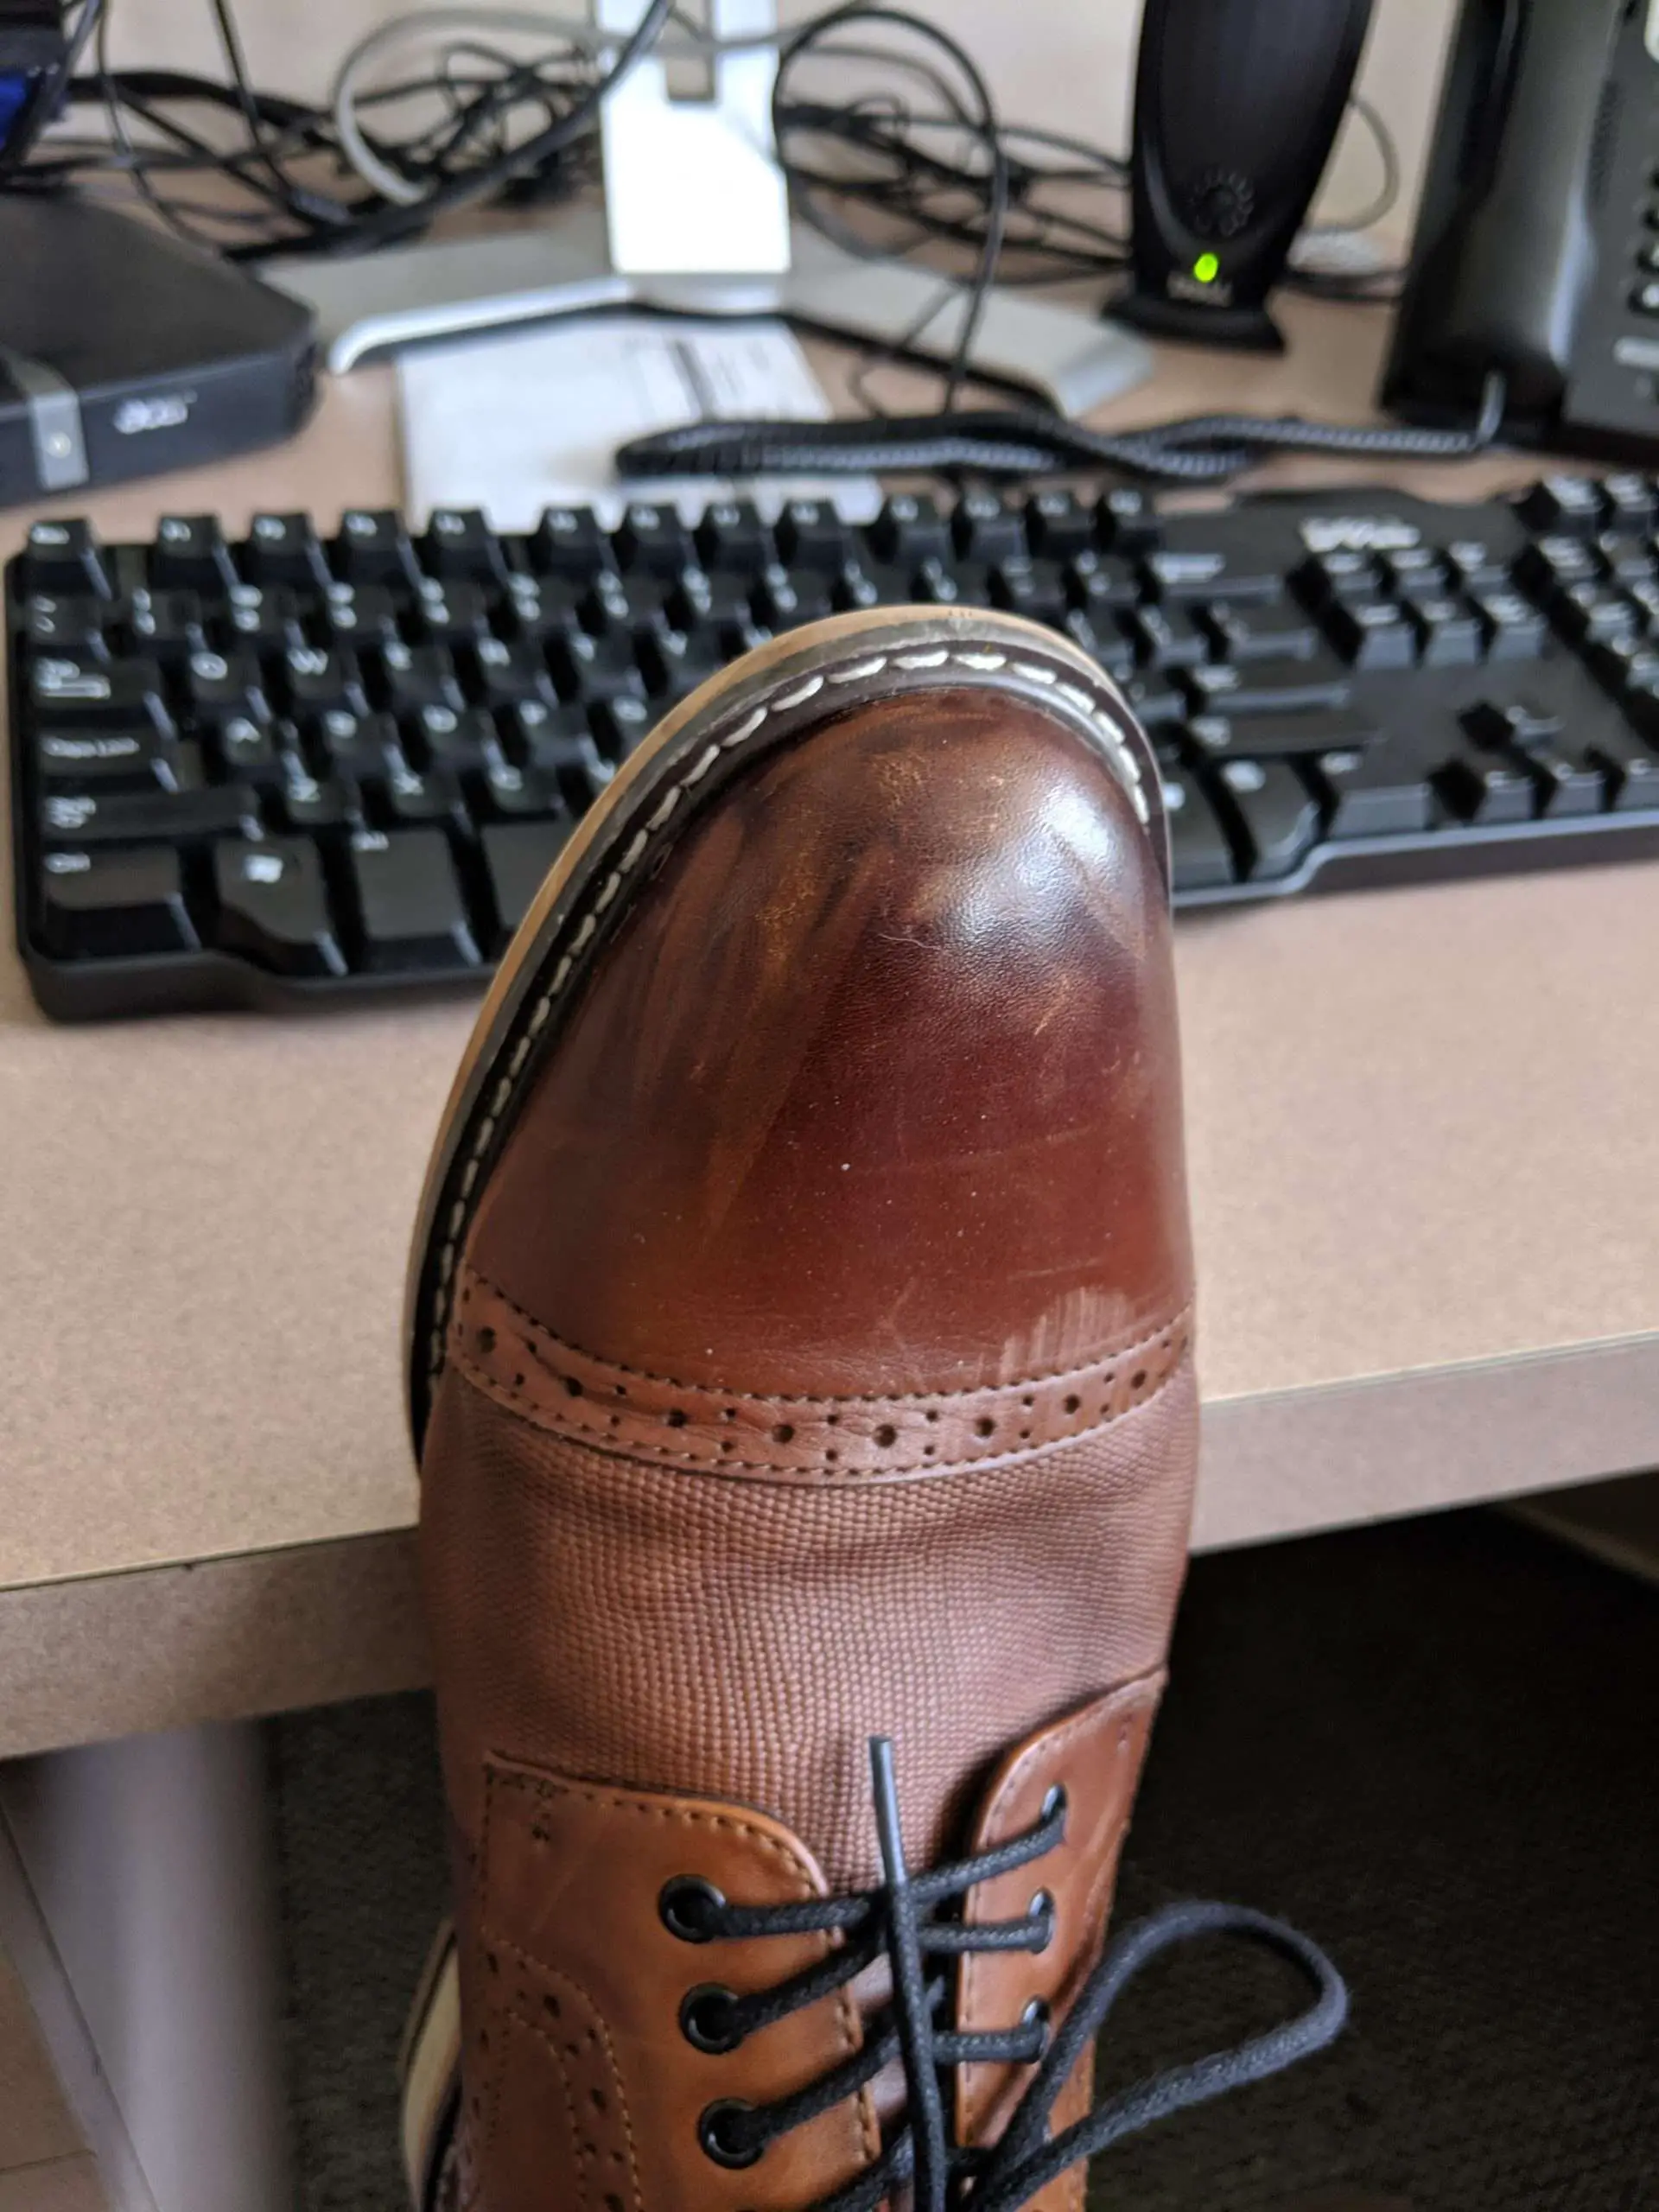 Best way to clean up brown dress shoes? : Frugal